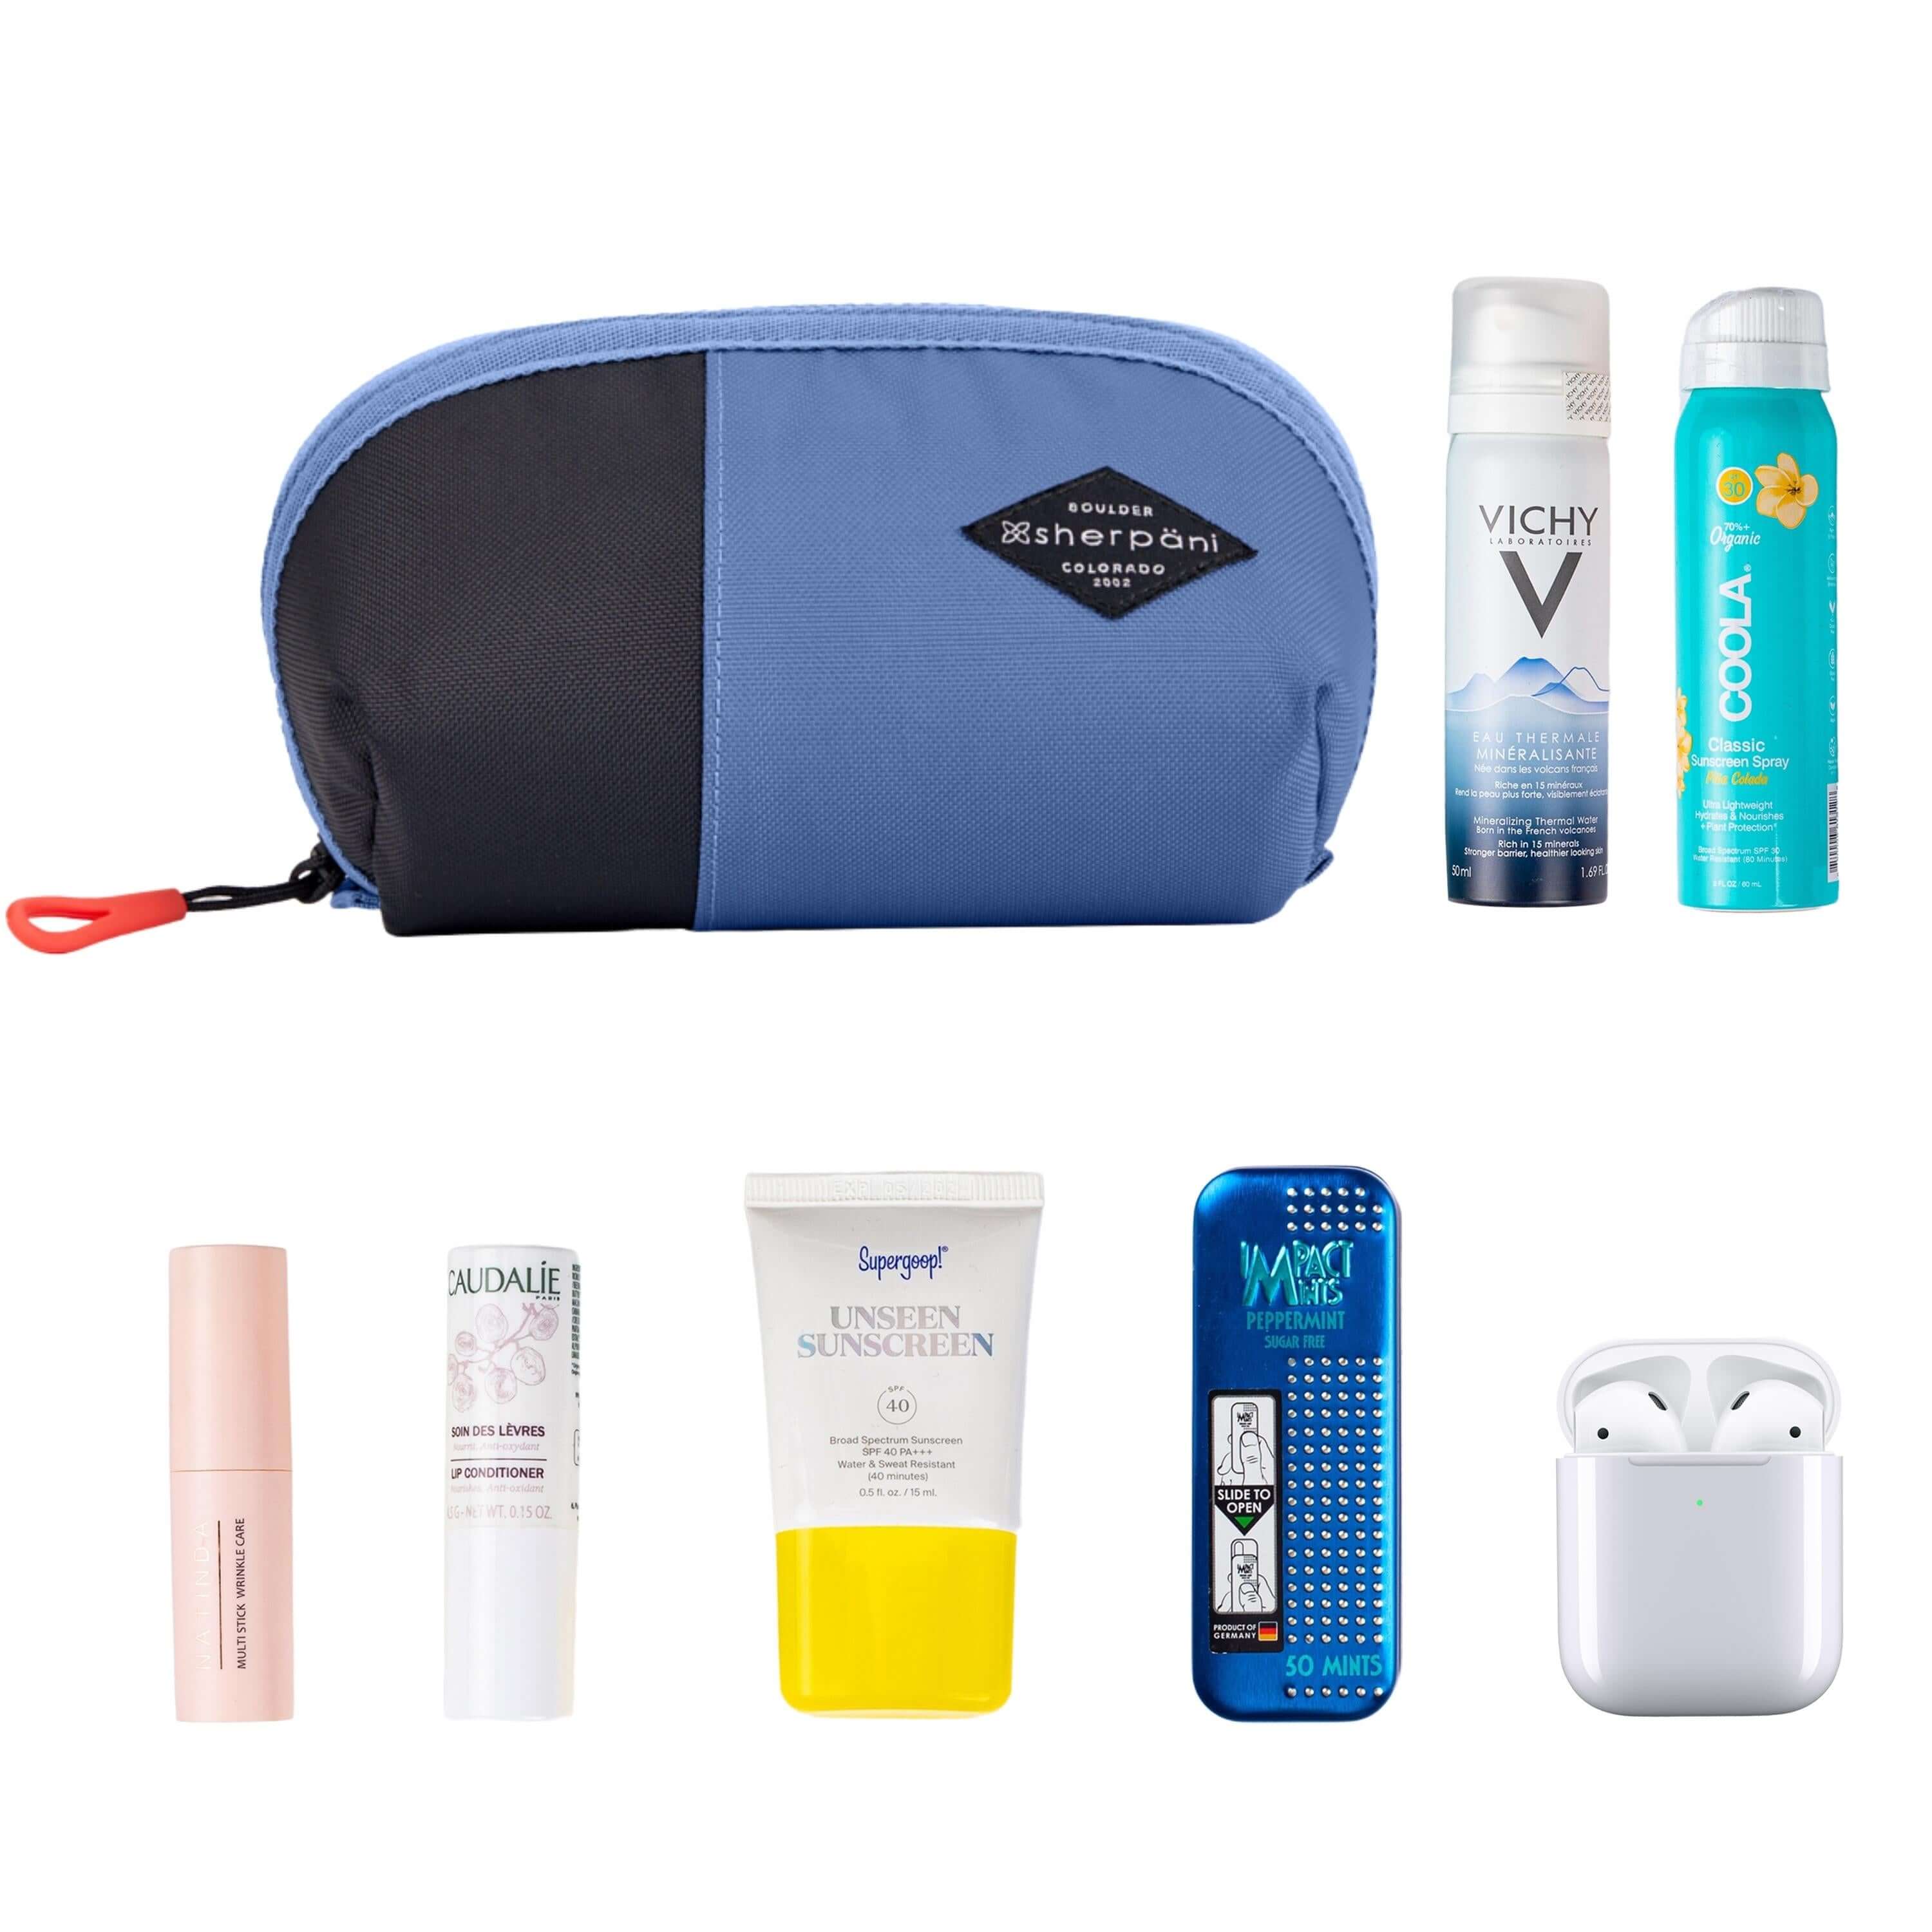 Top view of example items to fill the bag. Sherpani travel accessory, the Harmony in Pacific Blue, is shown in the upper left corner. It is surrounded by an assortment of items: beauty products, skincare products, sunscreen, mints and AirPods. 